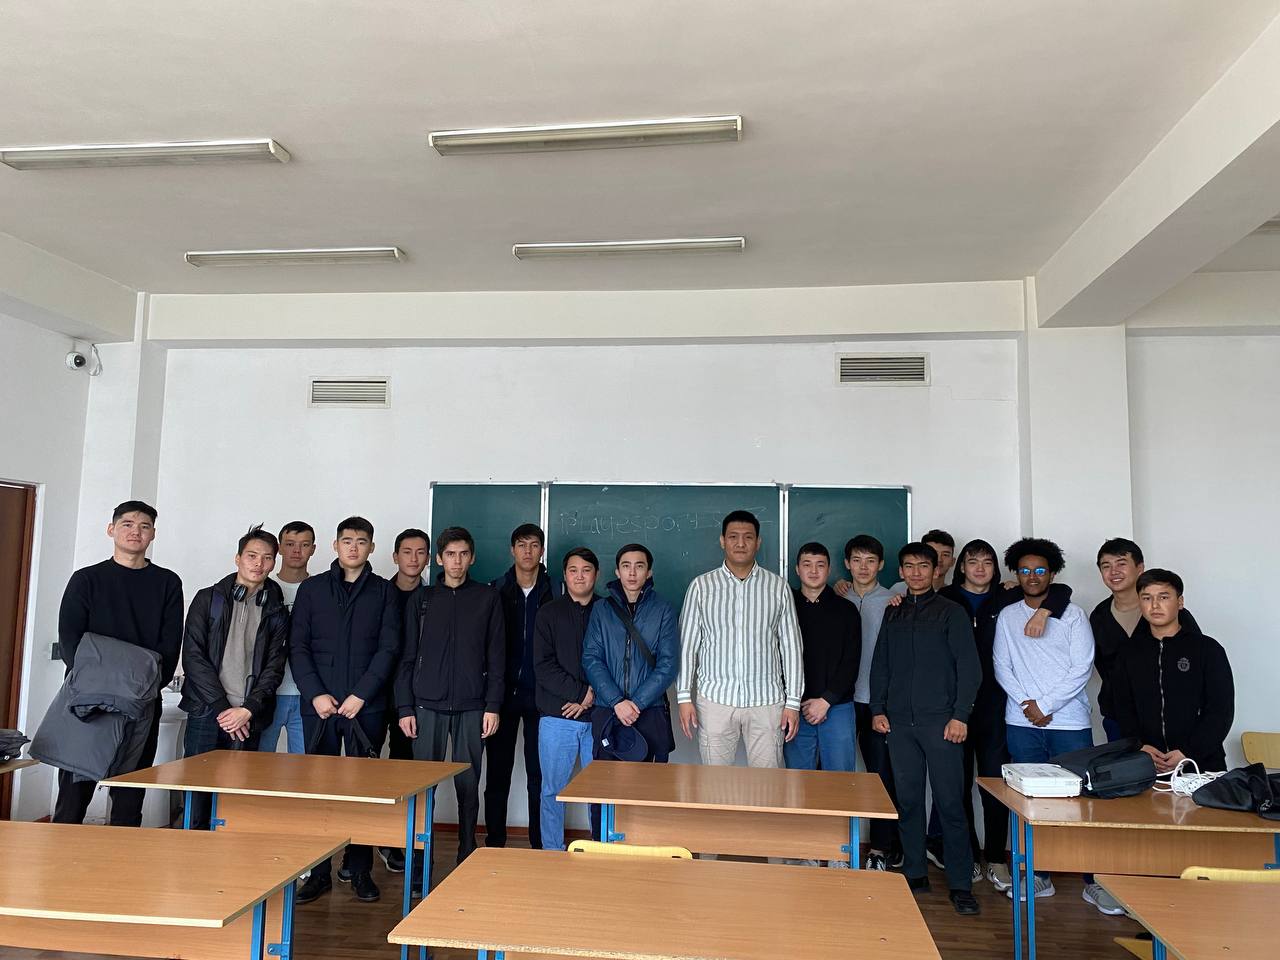 Within the framework of "Sustainable Development Goals 9", a meeting with representatives of "IPlay ESports" organization was held on November 10, organized by the Department of Computer Sciences, in order to develop the e-sports education segment.